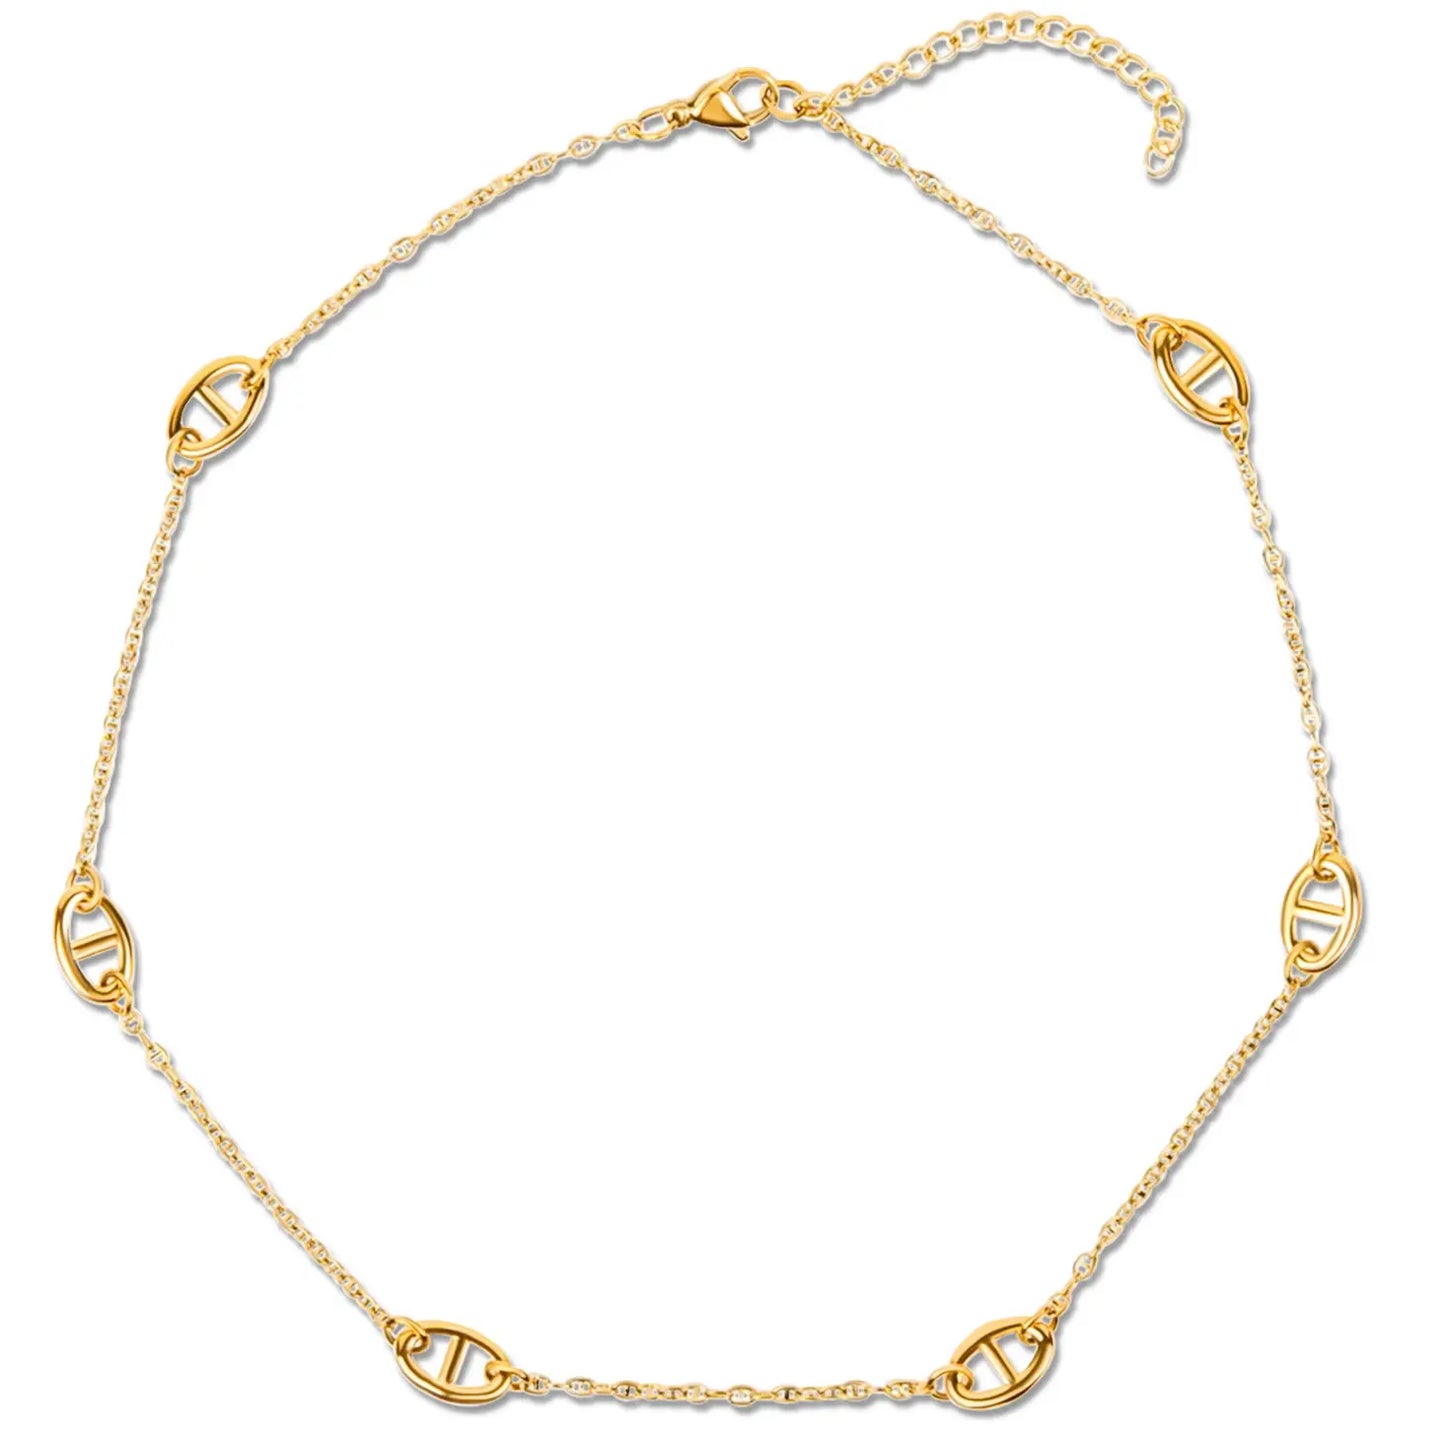 Ellie Vail- Mabel Anchor Chain Necklace